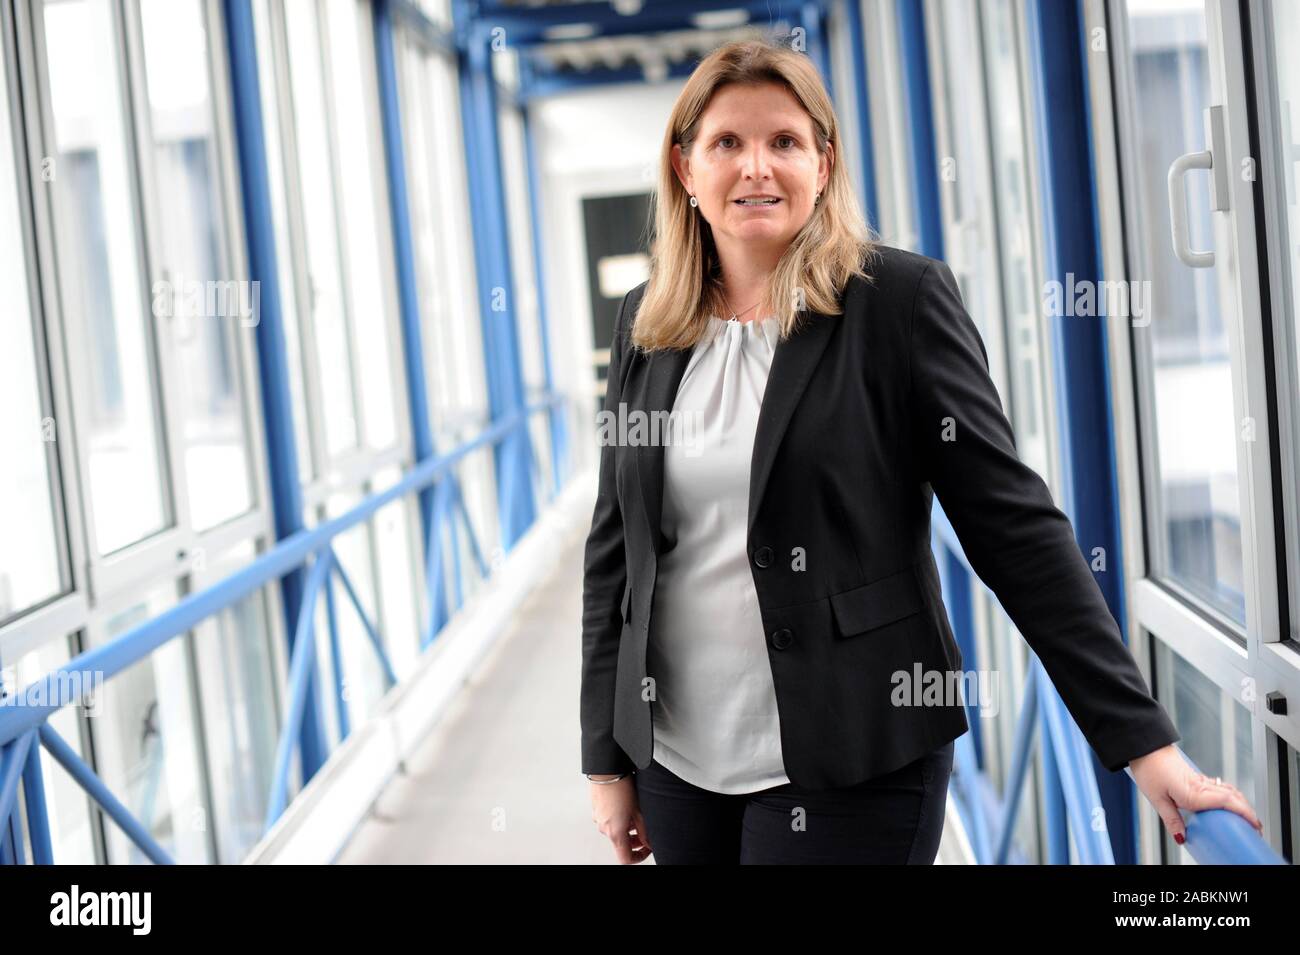 Nathalie Lepper, Head of the Department of Social Engagement in the Social Department of the City of Munich. [automated translation] Stock Photo